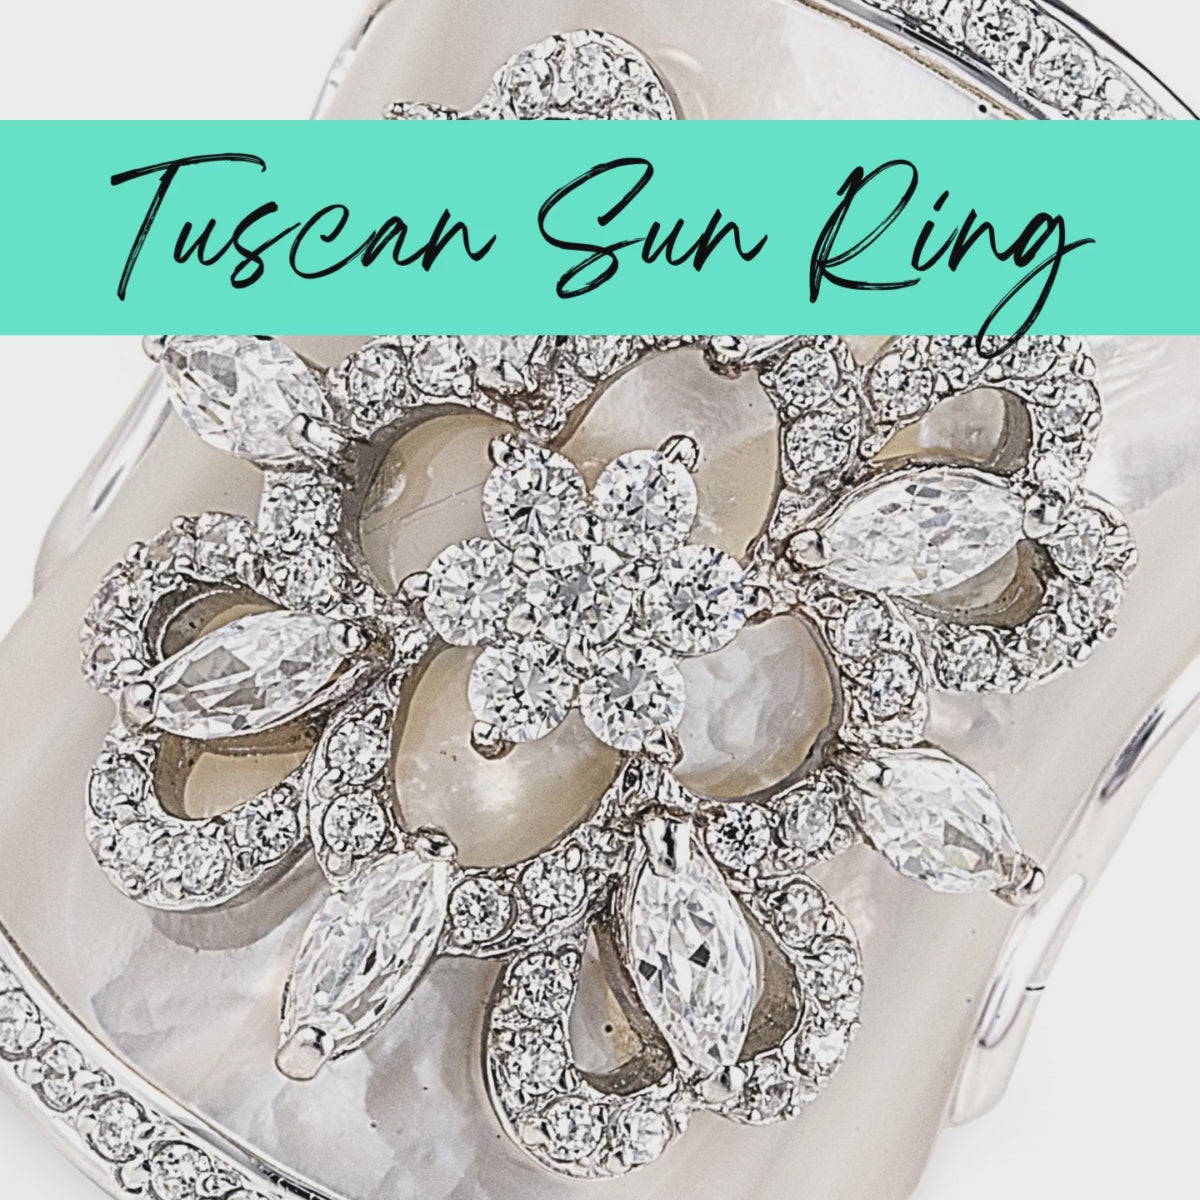 Tuscan Sun Ring in 925 Sterling Silver with polished Mother of Pearl & Cubic Zirconia stones in a sun design. Worldwide shipping with FREE shipping within Australia. Affordable luxury jewellery by Bellagio & Co.